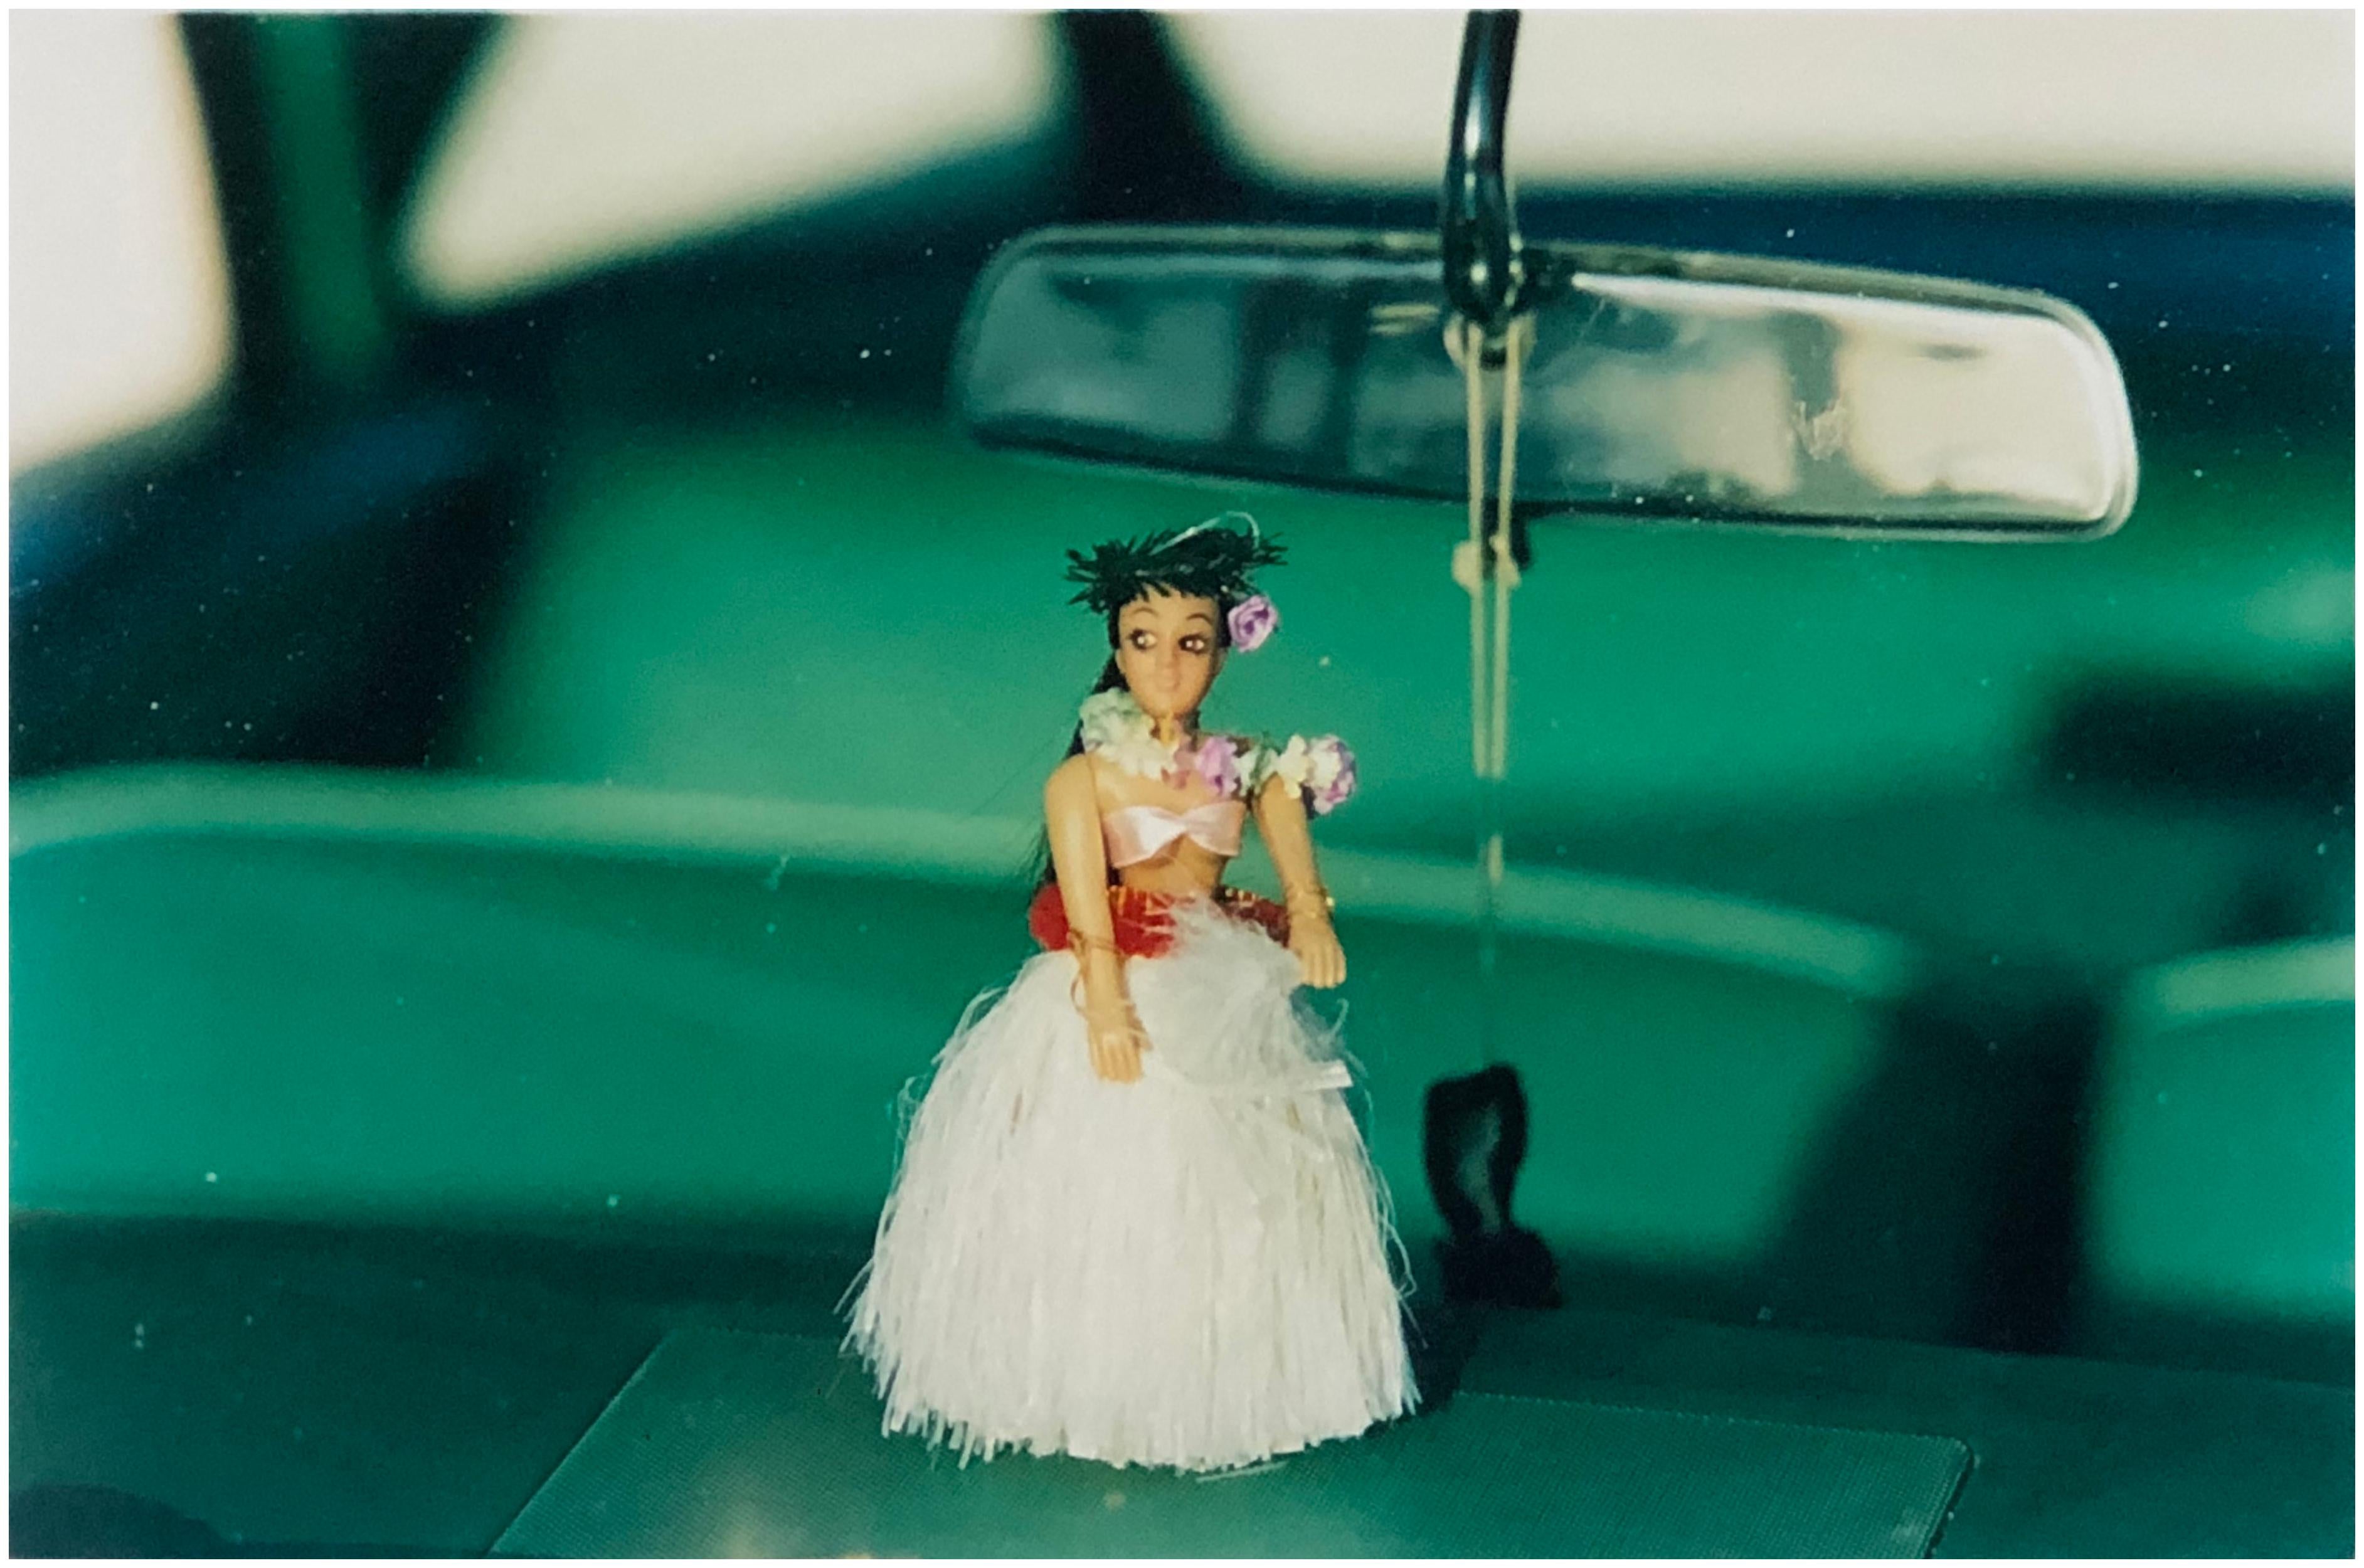 'Hula Doll', part of Richard Heeps 'Man's Ruin' Series, captured at Viva Las Vegas. This fun artwork has a cool kitsch vibe, the photograph itself has a lo-fi effect.

This artwork is a limited edition of 25, gloss photographic print, dry-mounted to